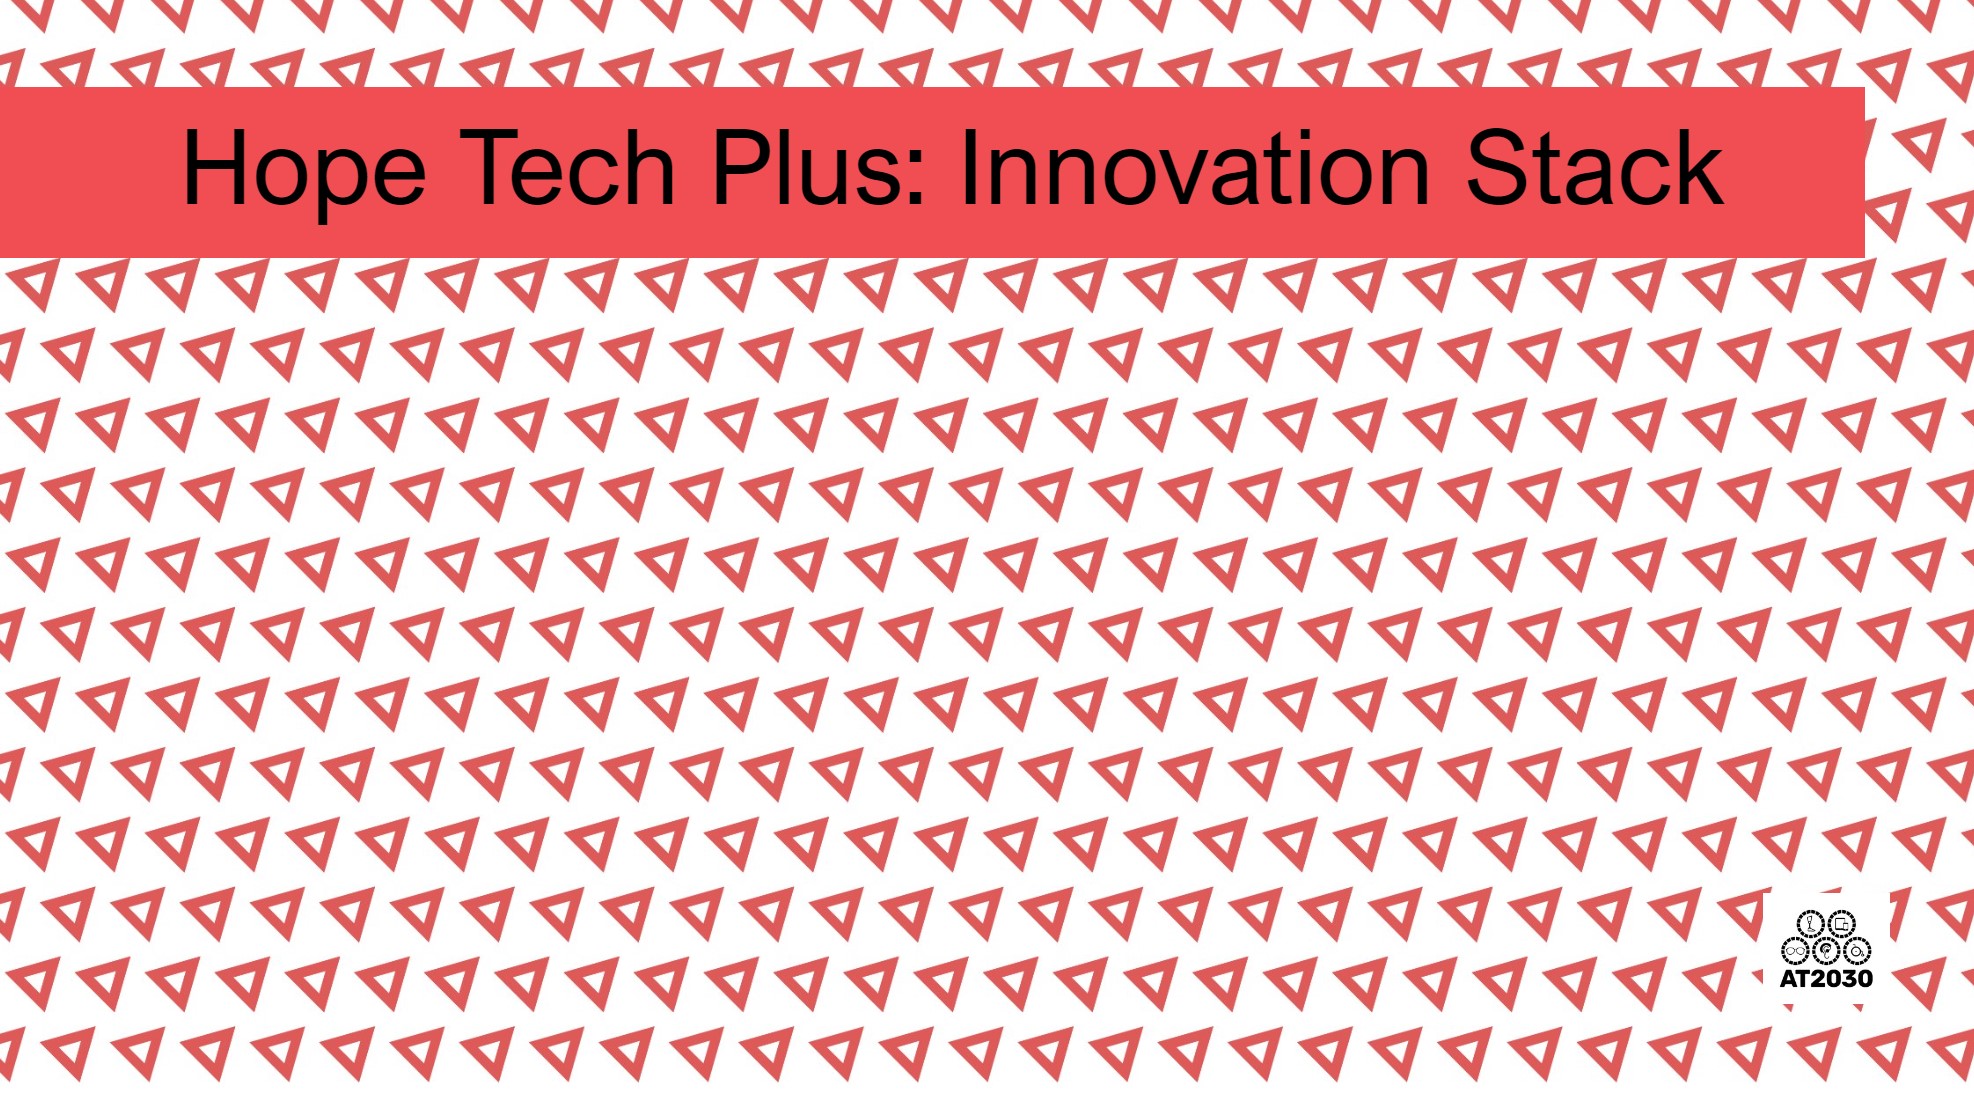 Image of the title 'Hope Tech Plus' with red patterned background Cover Image